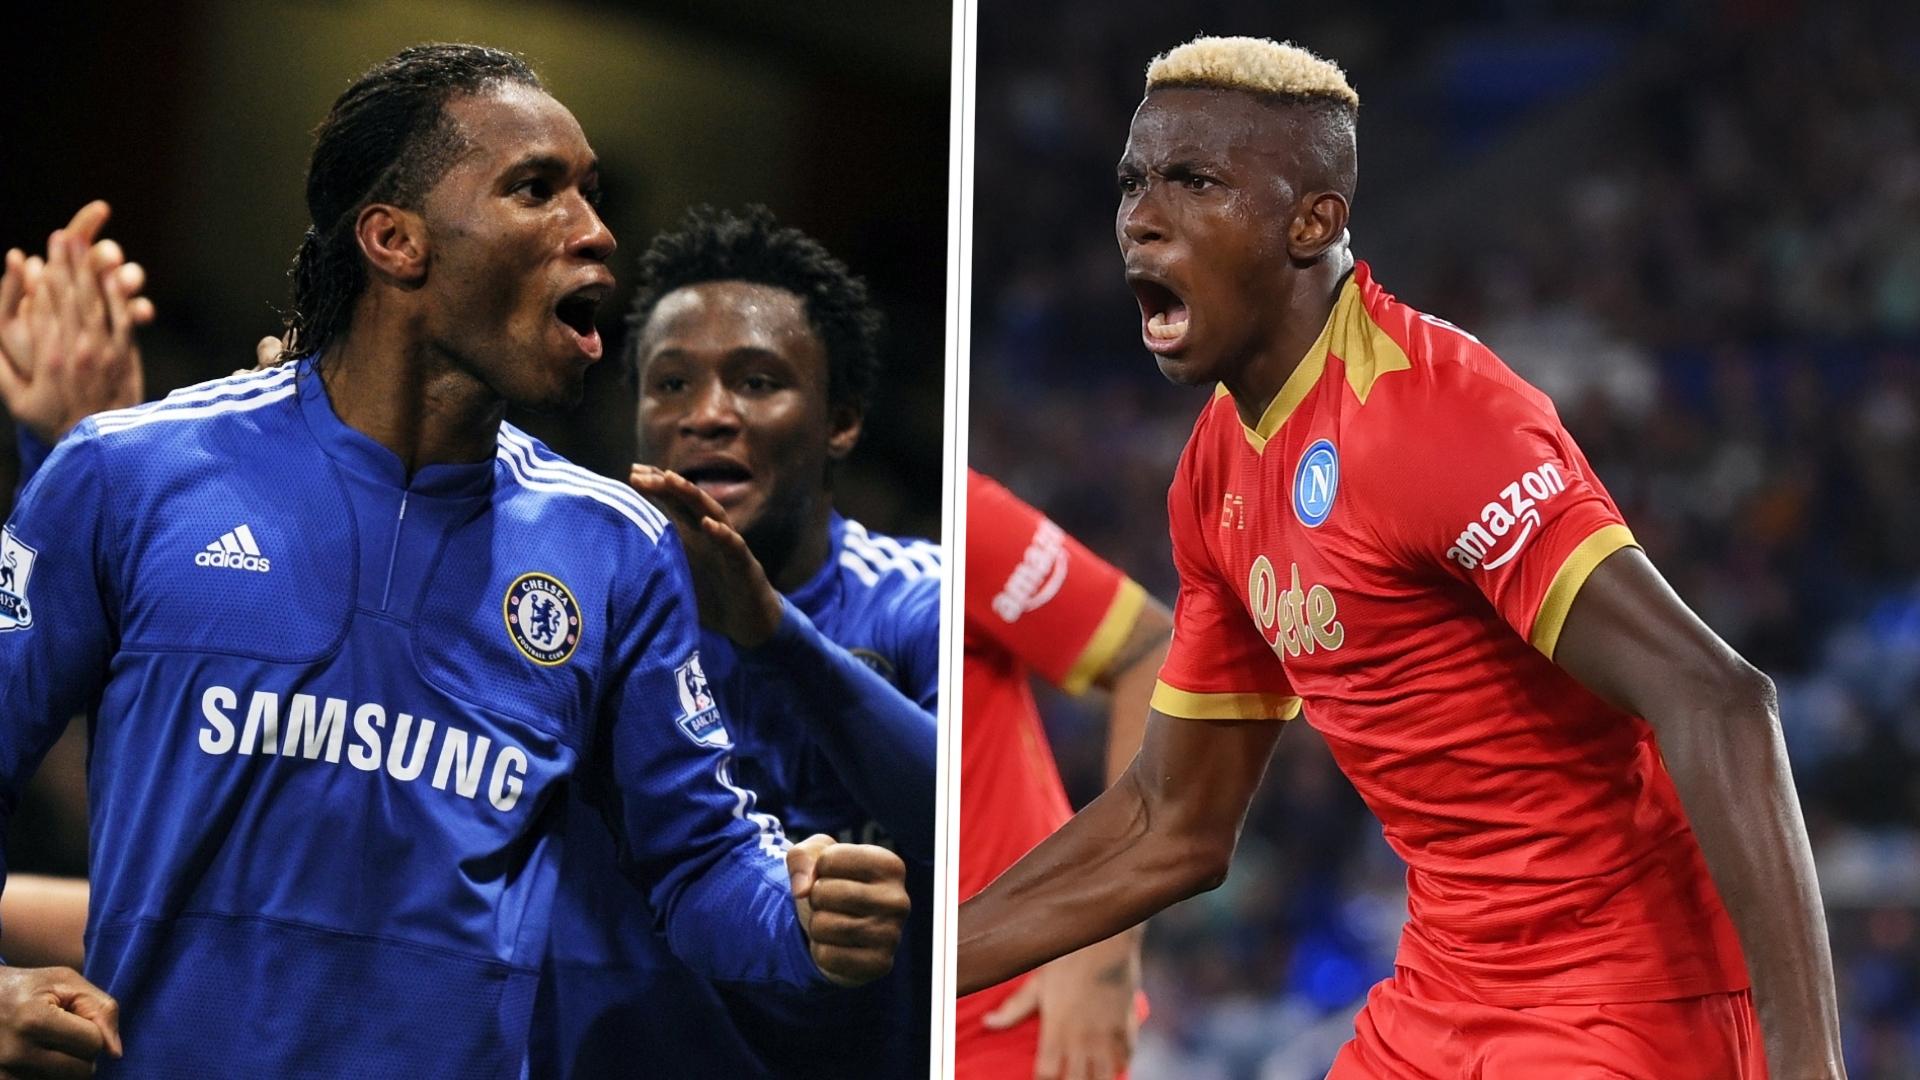 Didier Drogba Reacts to IShowSpeed's Bizarre Question: A Highlight of the Match for Hope